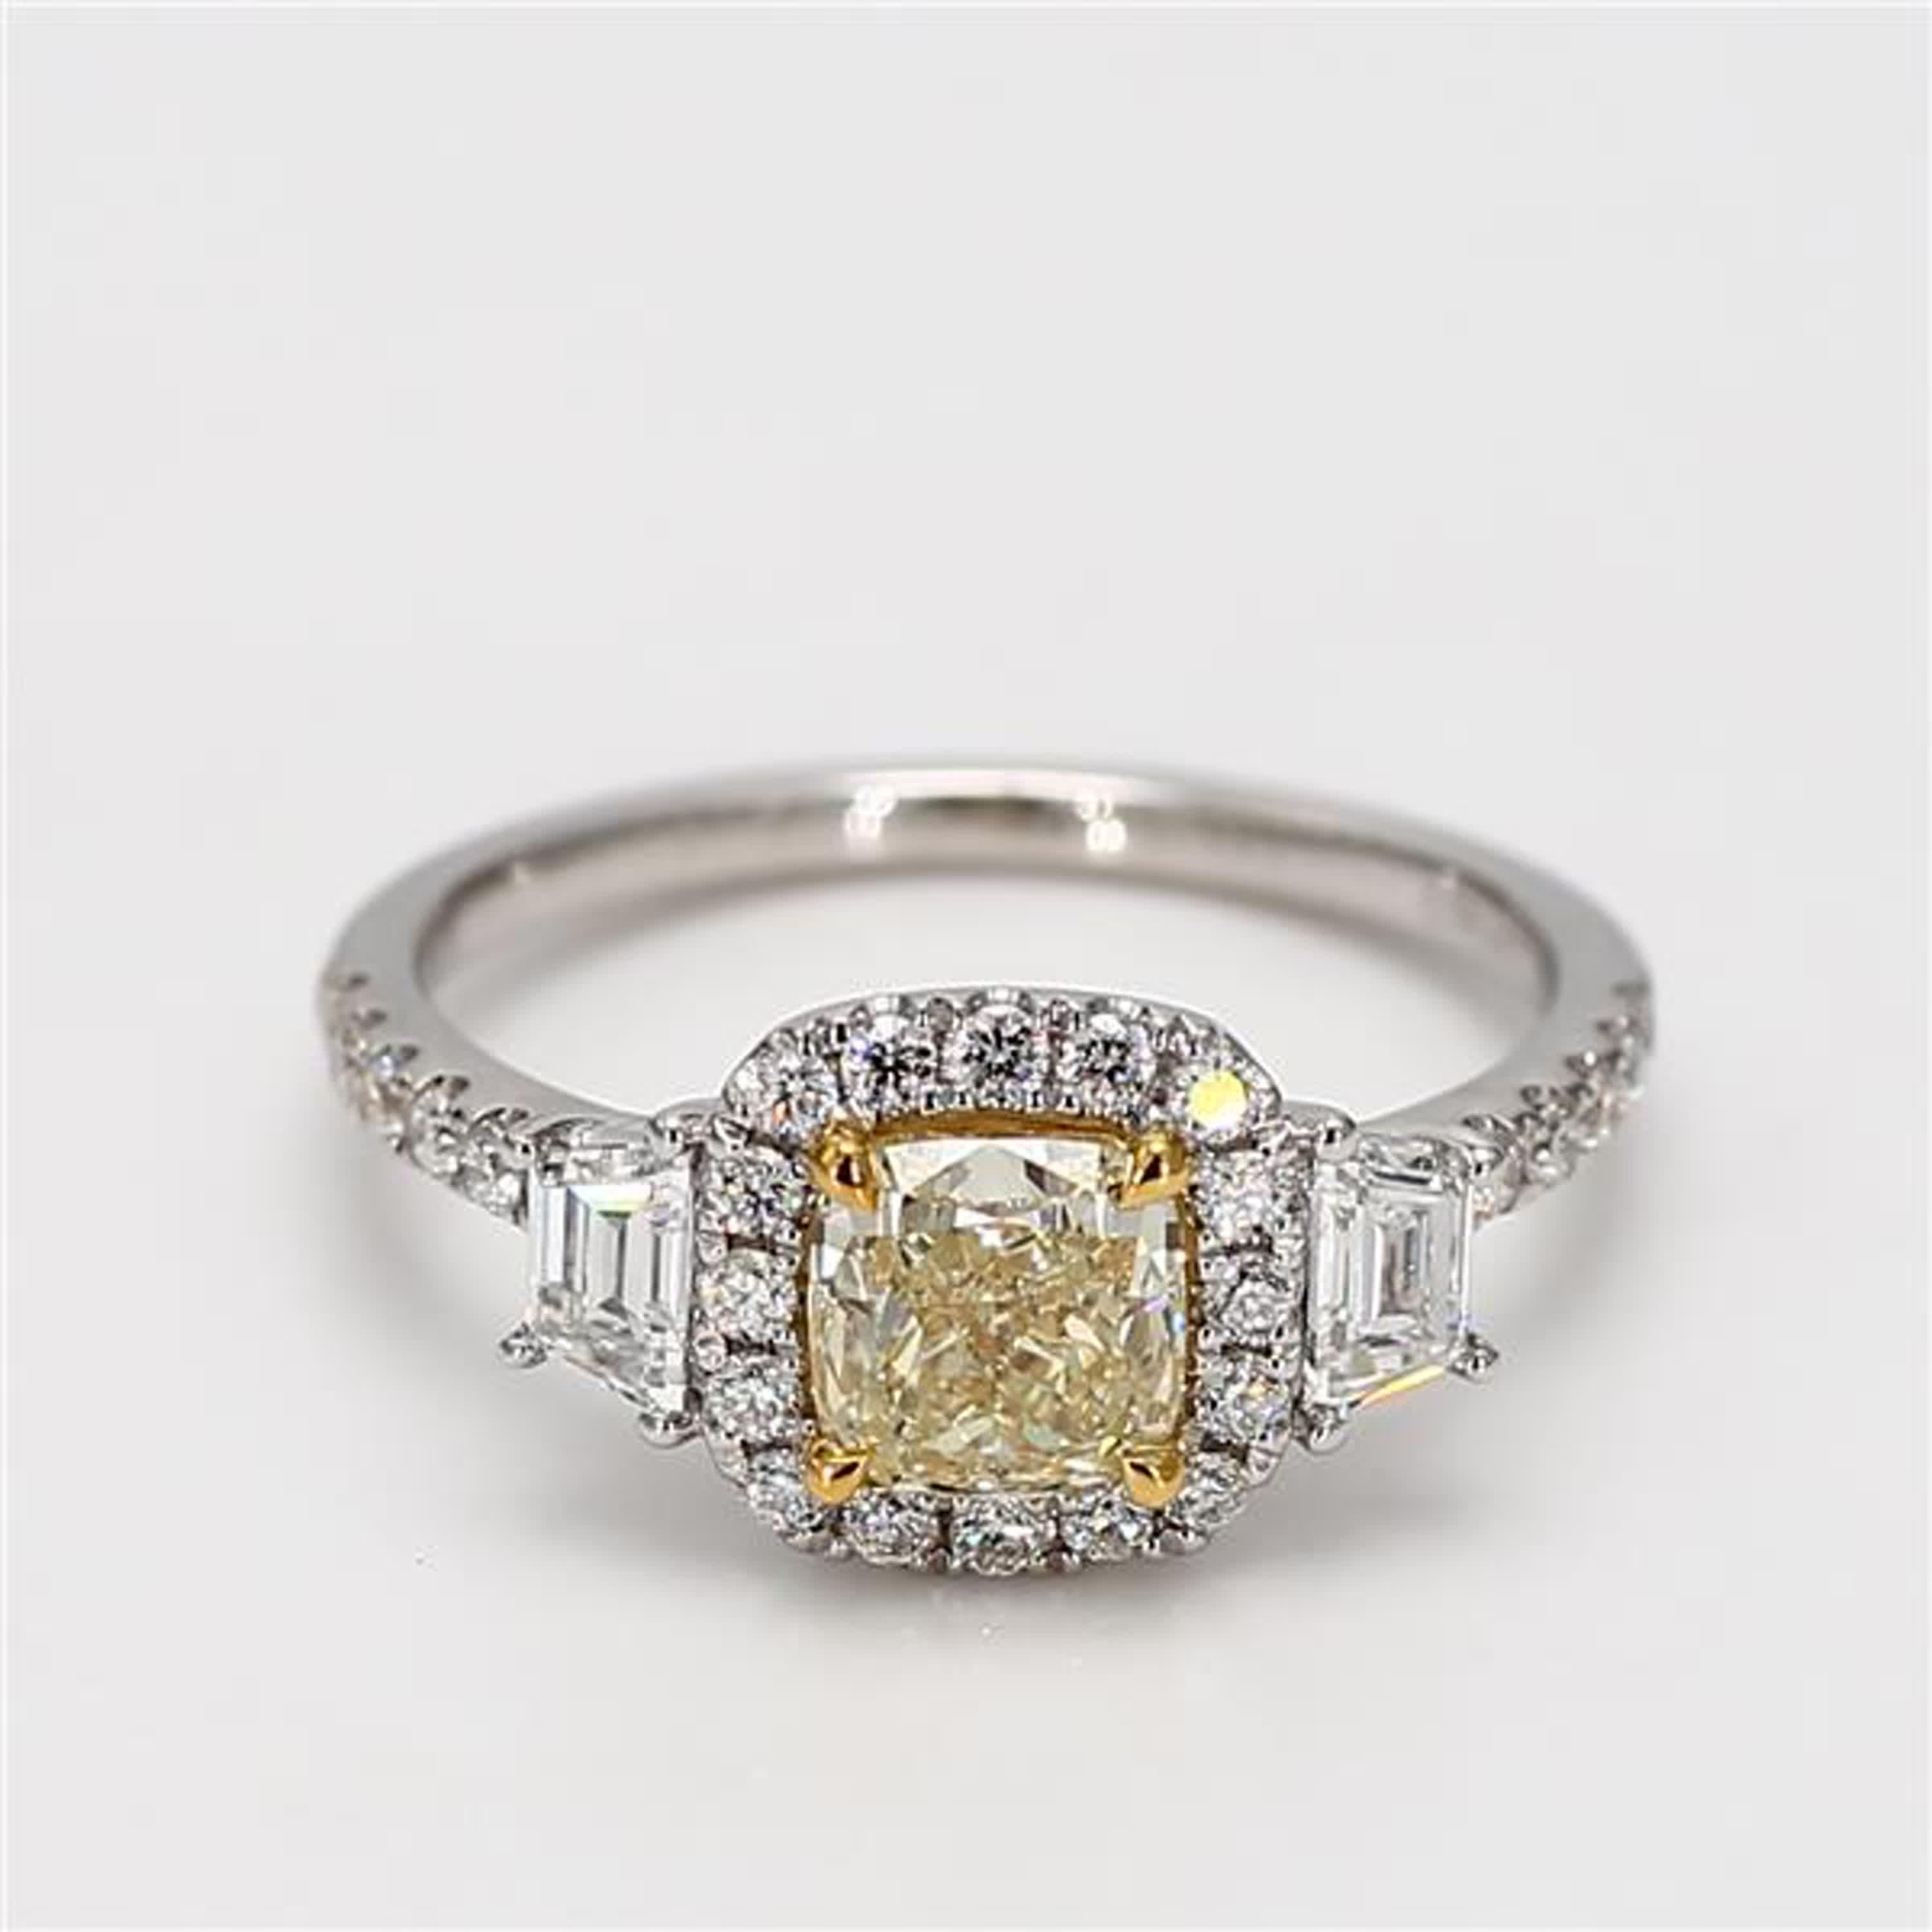 RareGemWorld's classic GIA certified diamond ring. Mounted in a beautiful 18K Yellow and White Gold setting with a natural cushion cut yellow diamond. The yellow diamond is surrounded by natural taper baguette white diamonds and round natural white